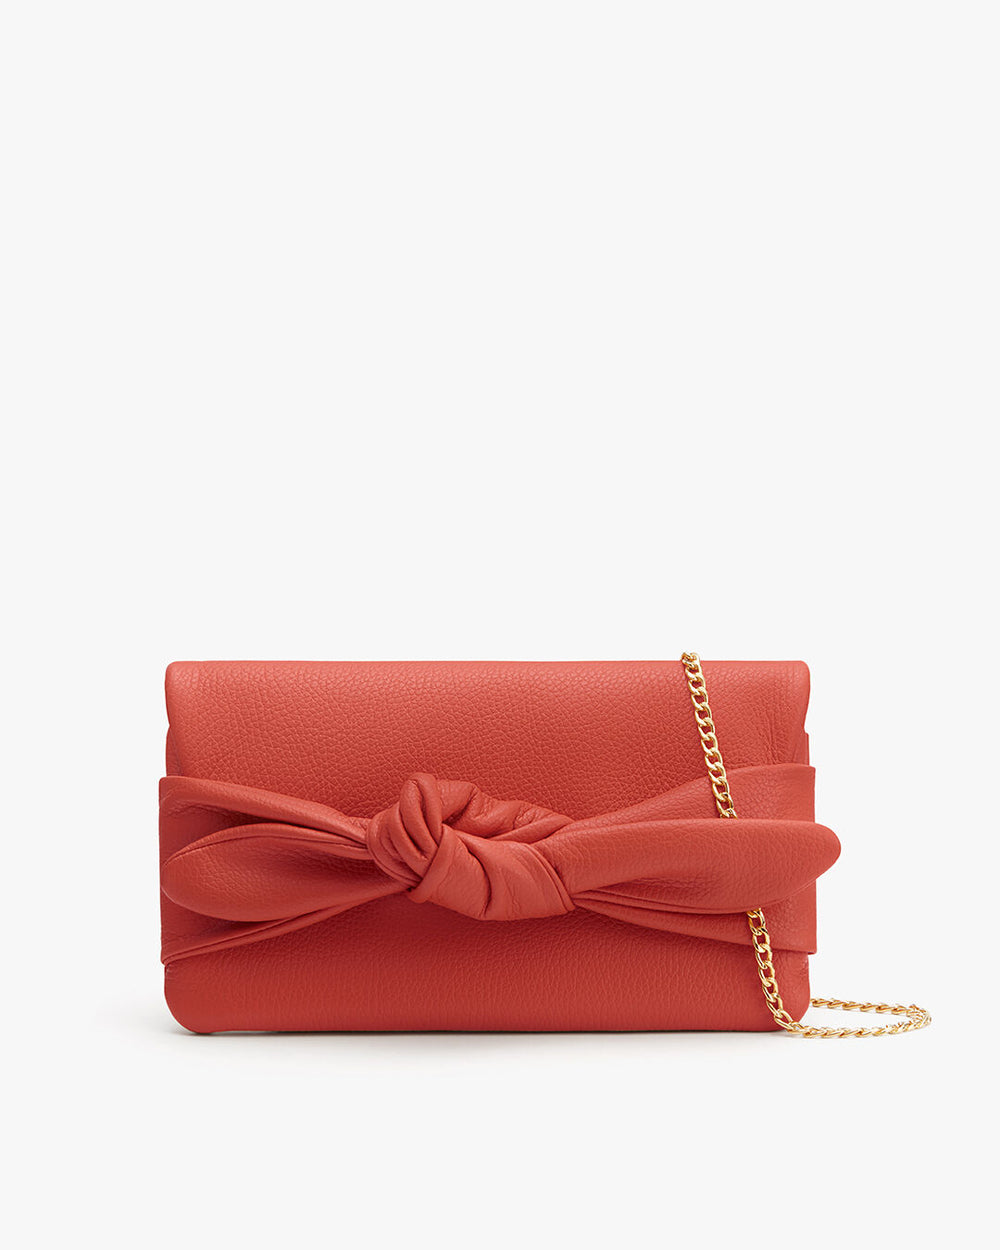 Handbag with a knotted design and chain strap on a plain background.